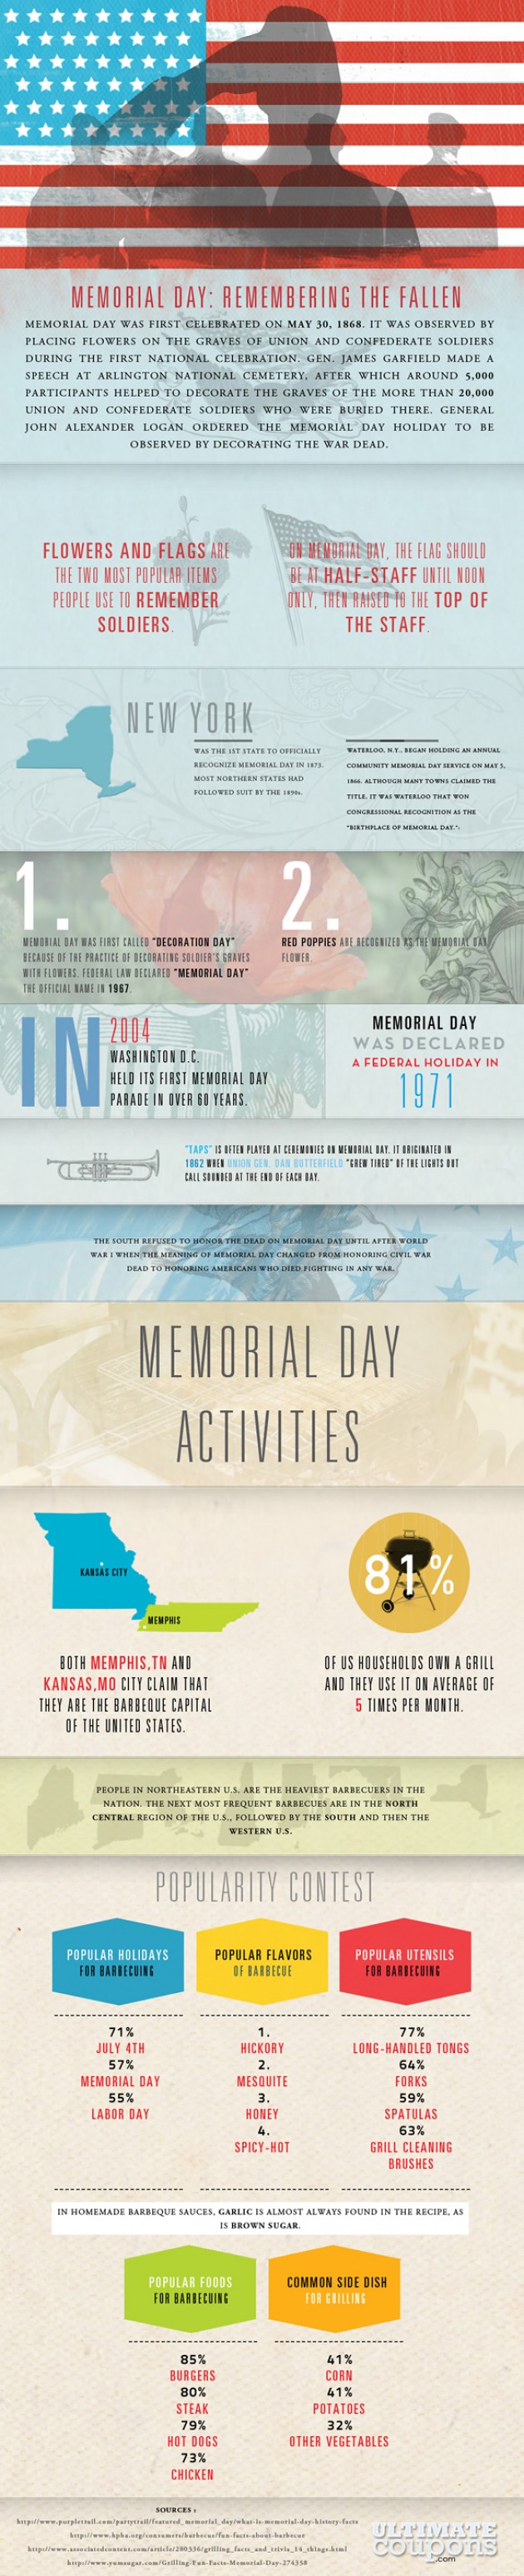 memorial day infographic